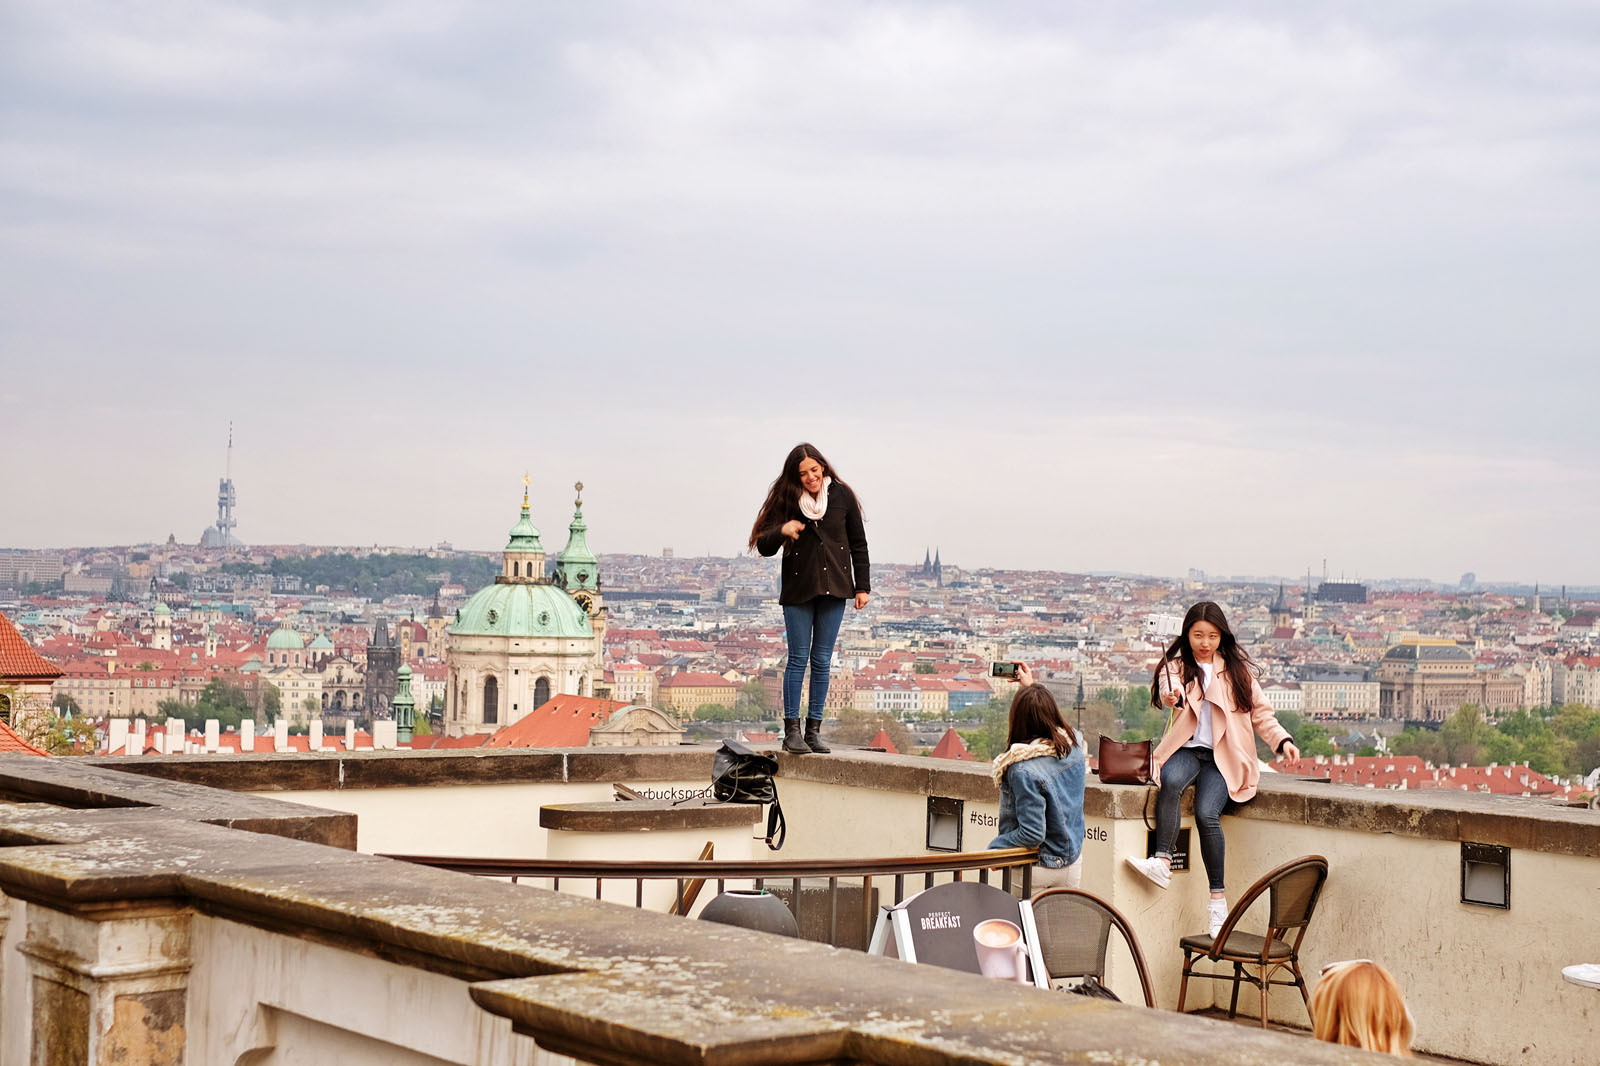 A selfie on high with Prague in the background, street style. Travel photography by Kent Johnson